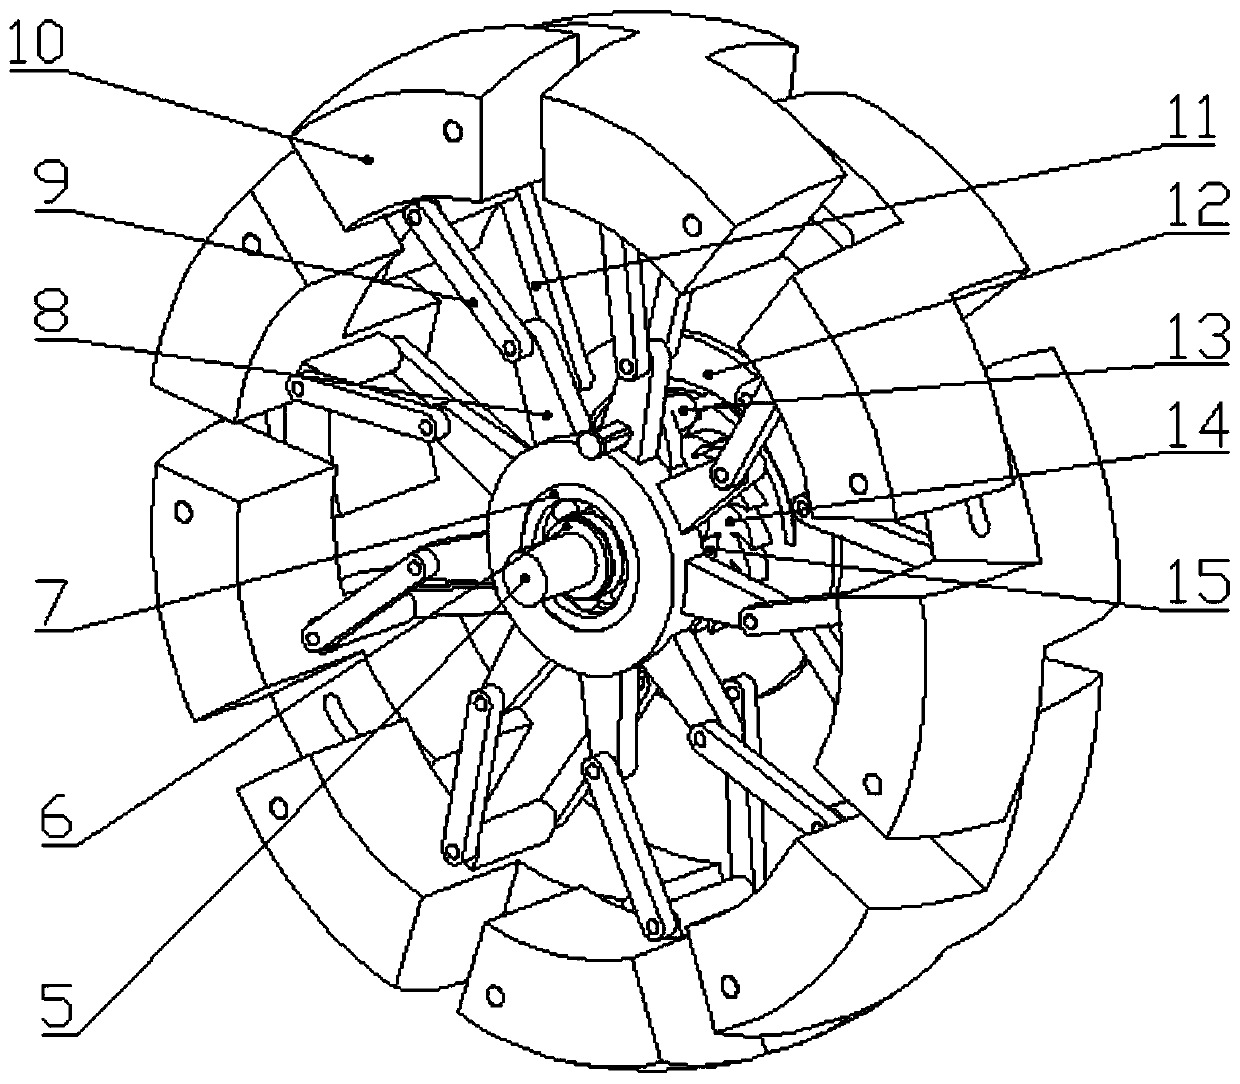 Sliding block type section full-supporting core rod structure with diameter changed through ratchet wheel inverse stop rotation